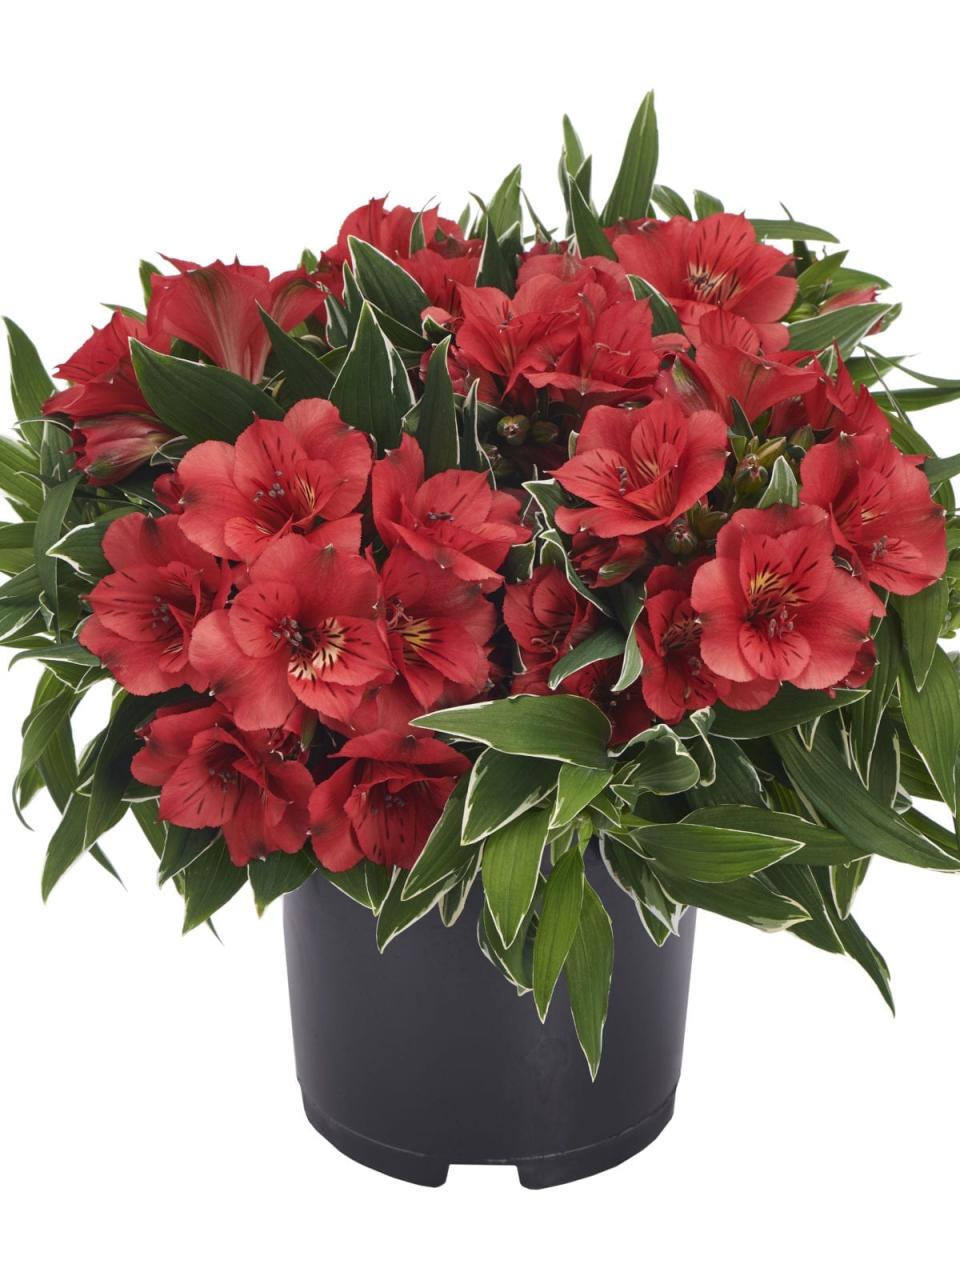 Colorita Katiana is a  pot alstroemeria that's easy to care for.